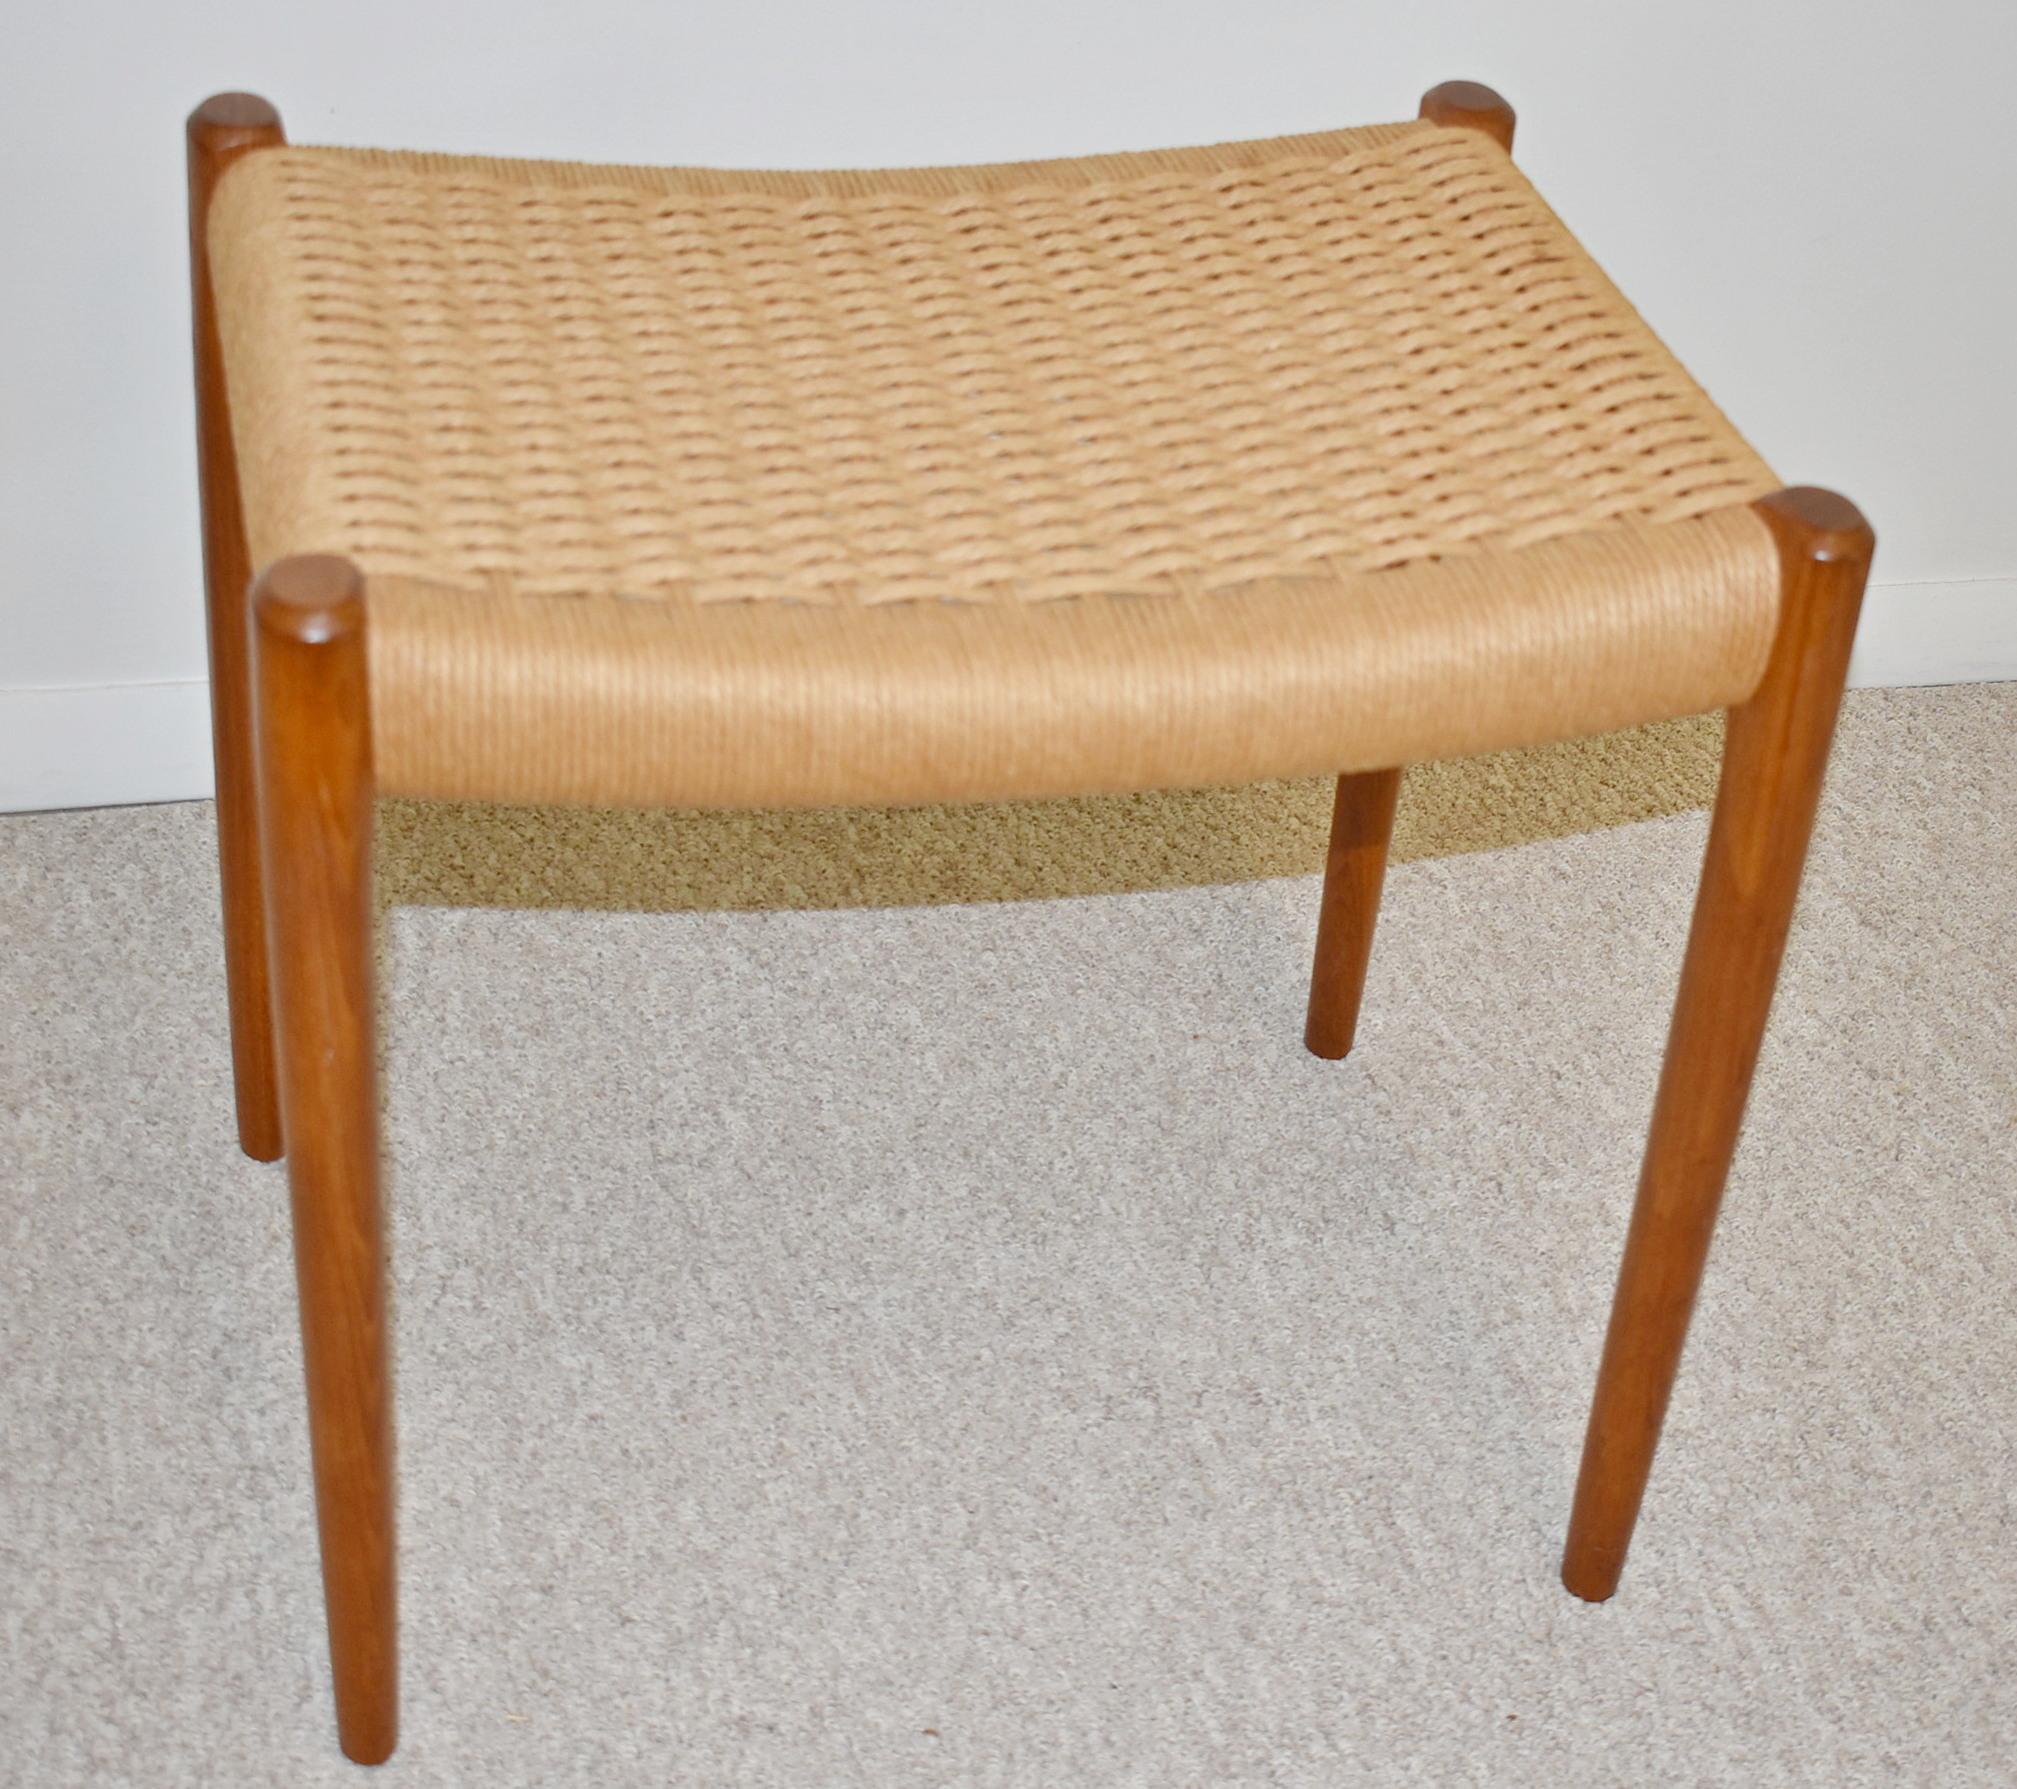 Vintage stool designed in 1963 by the Danish cabinet maker and furniture designer Niels Otto Møller (1920-1982) and manufactured by J. L. Møllers Møbelfabrik, Denmark in the 1960s. The stool is made of solid teak with the original Danish papercord